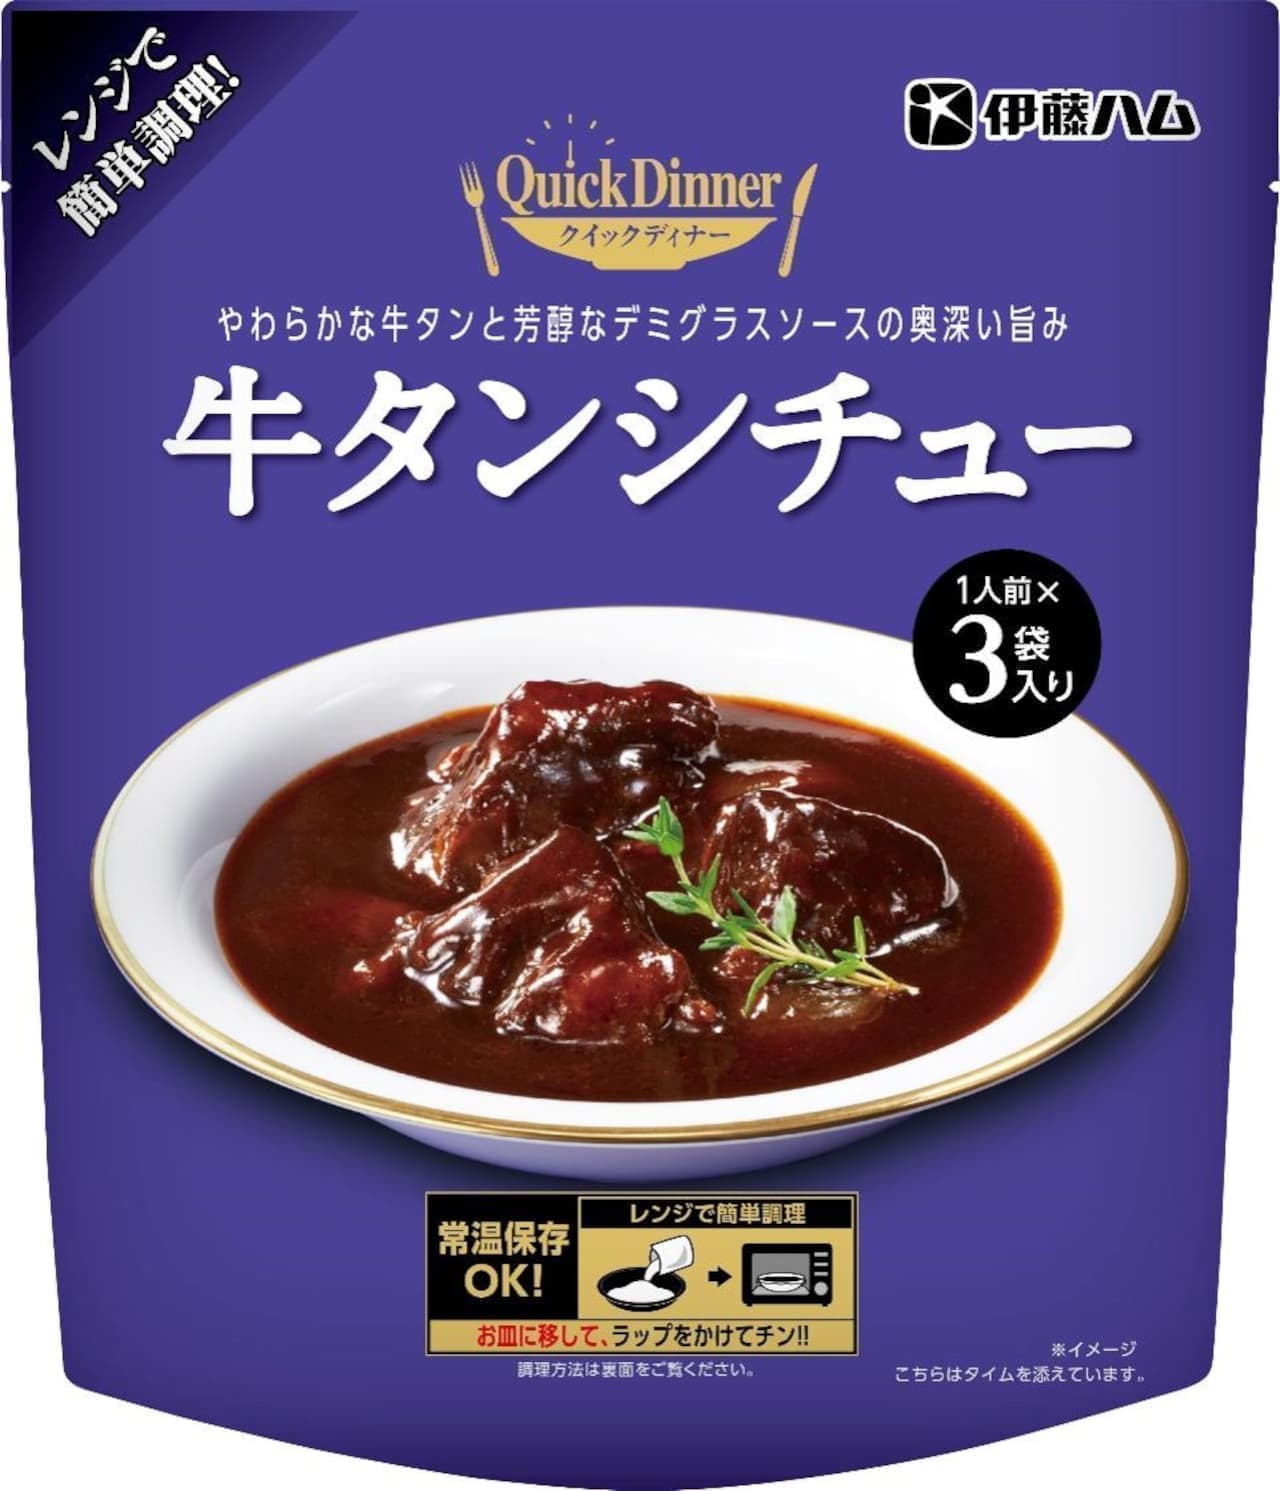 Itoham "Quick Dinner Beef Tongue Stew"